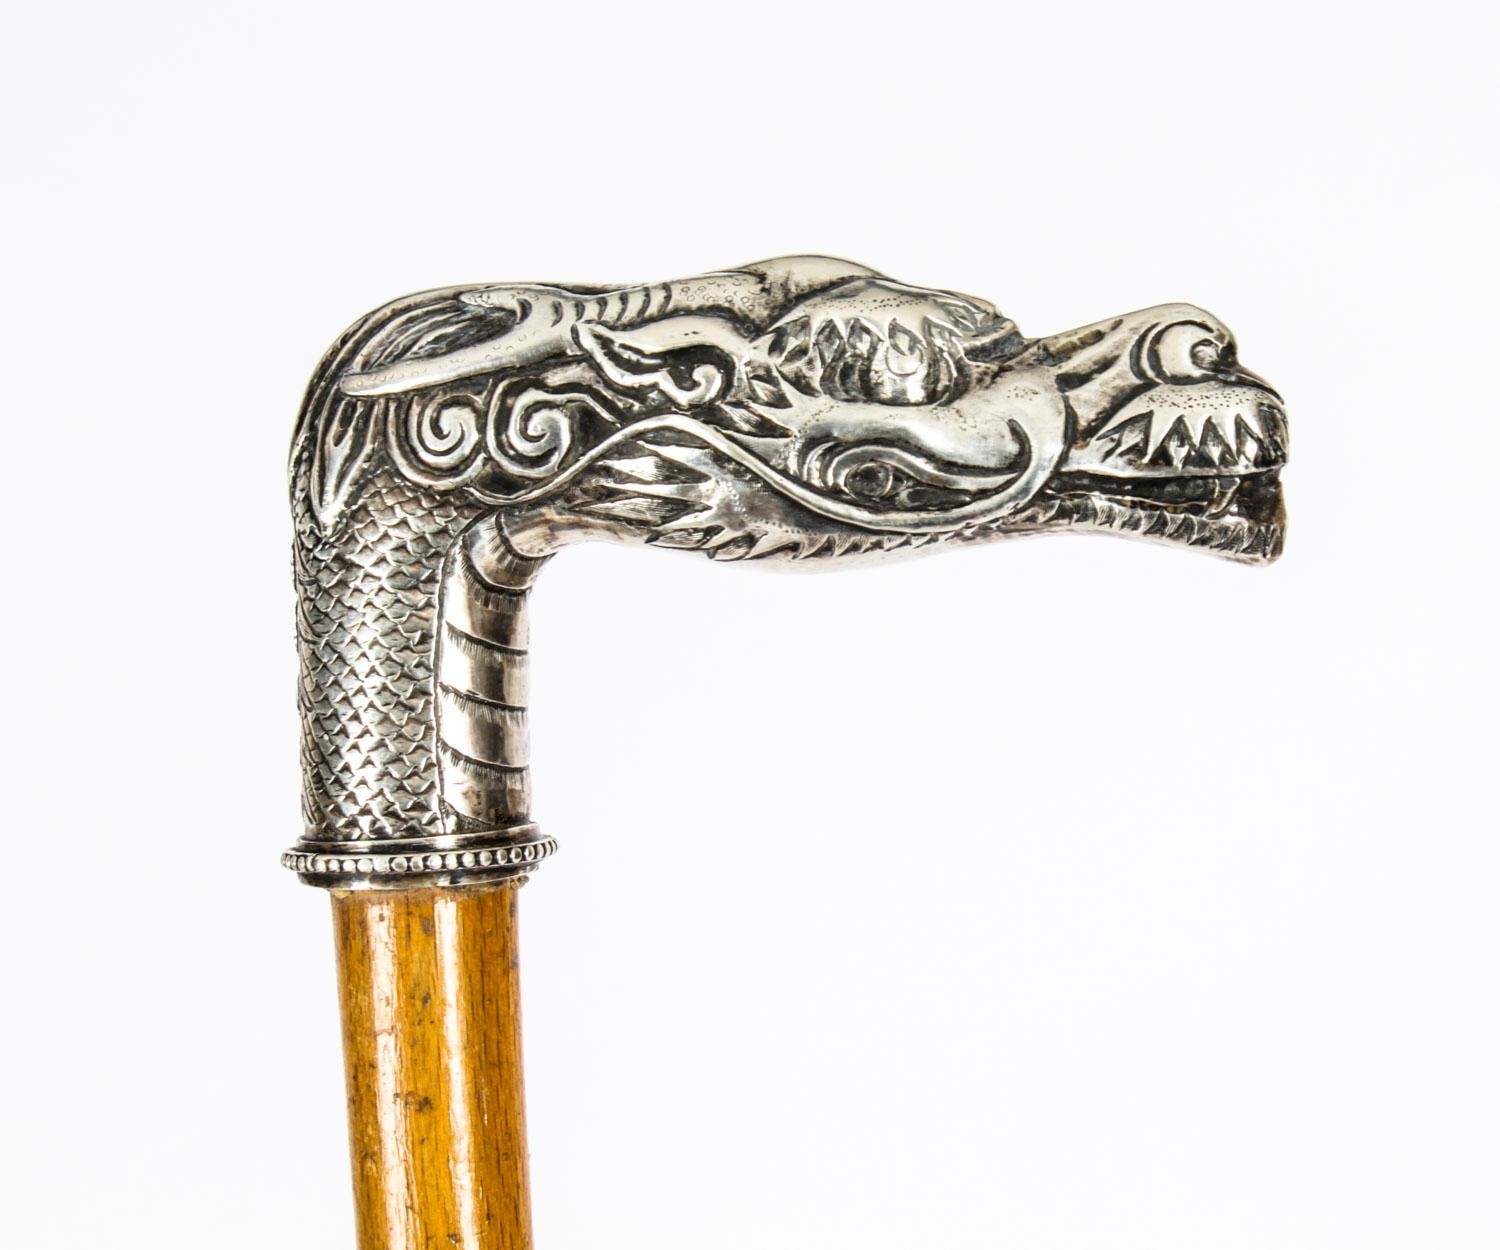 This is a fantastic antique French silver plated Dragon head and Malacca walking stick, circa 1880 in date.

It has a very decorative silver-plated dragon head pommel which is cast with great attention to detail with a sturdy Malacca tapering